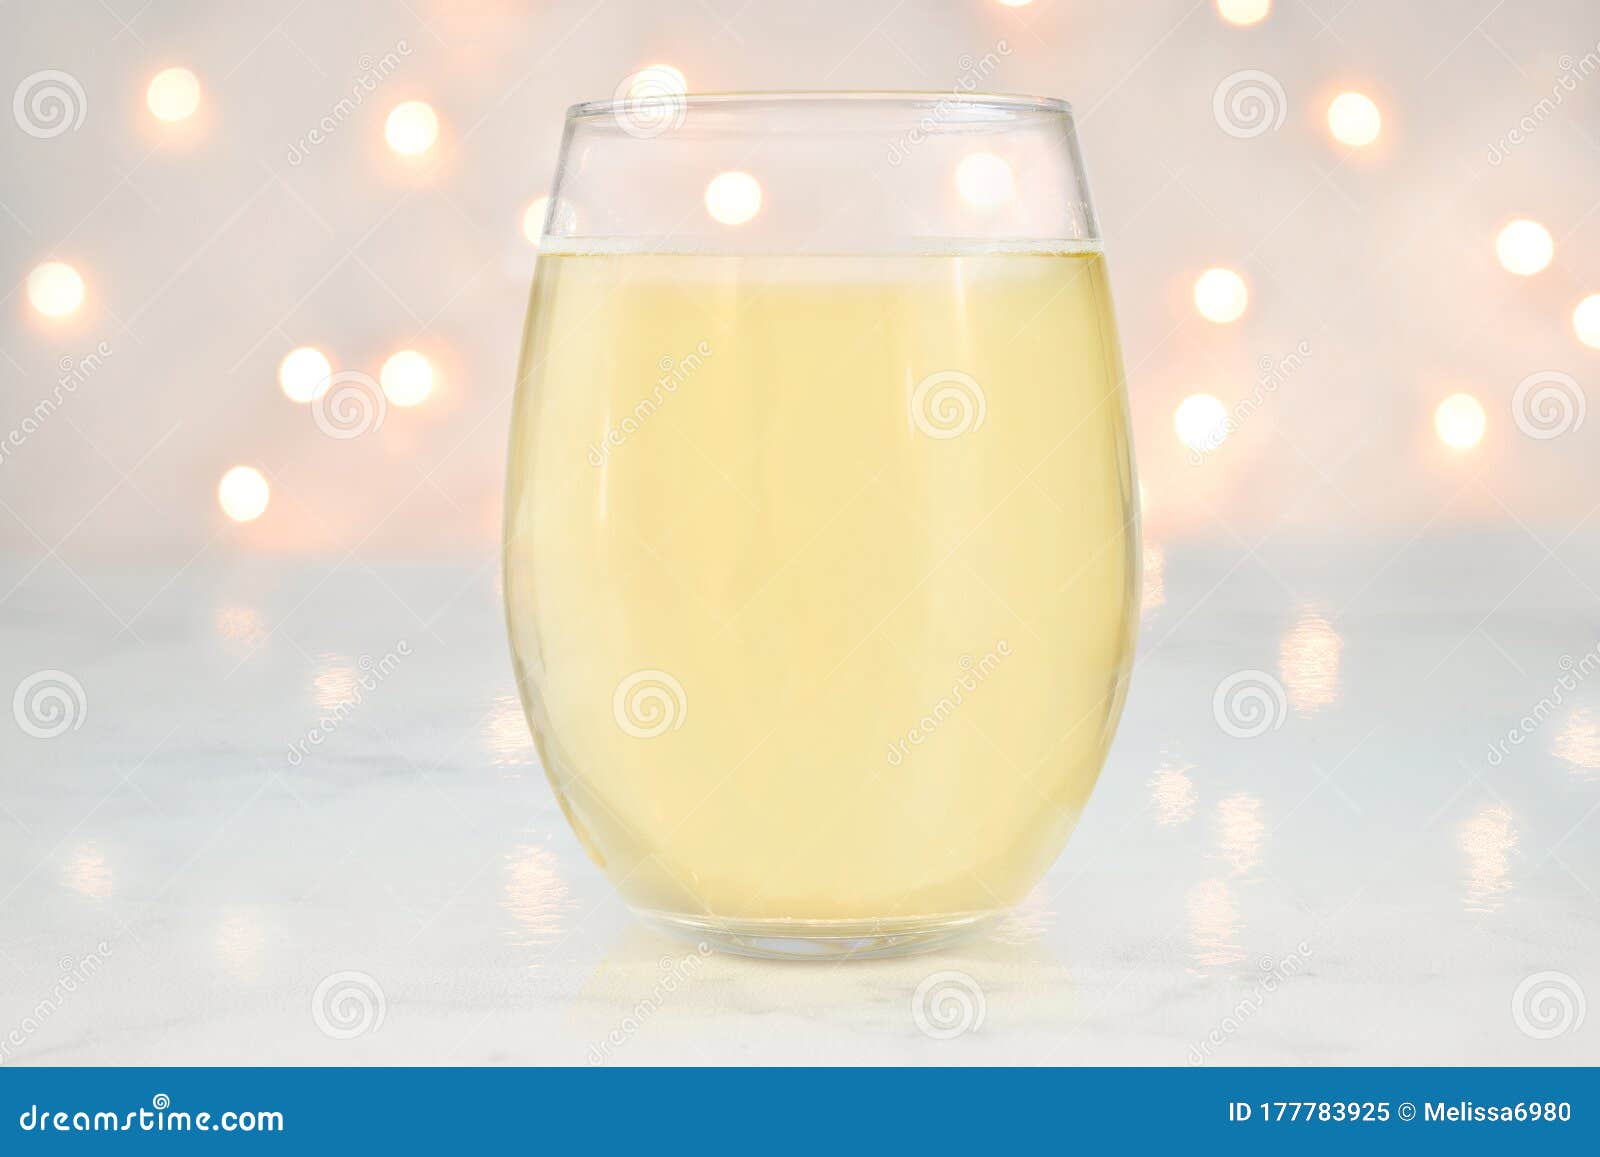 https://thumbs.dreamstime.com/z/stemless-wine-glass-mockup-glowing-bokeh-lights-no-stem-wineglass-featuring-filled-white-glow-romantically-177783925.jpg